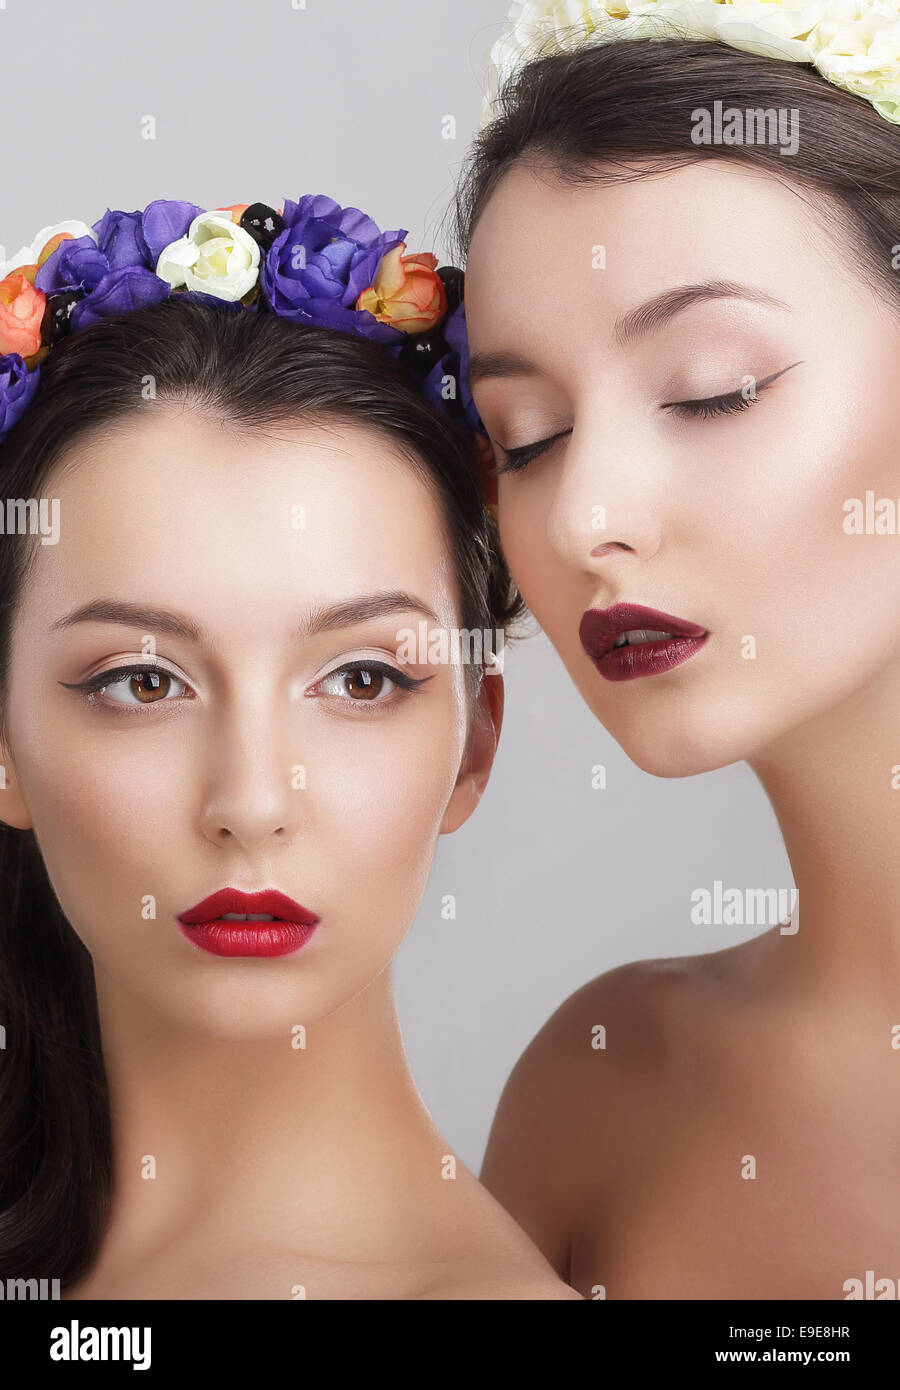 Imagination. Women in Garlands with Vernal Flowers Stock Photo